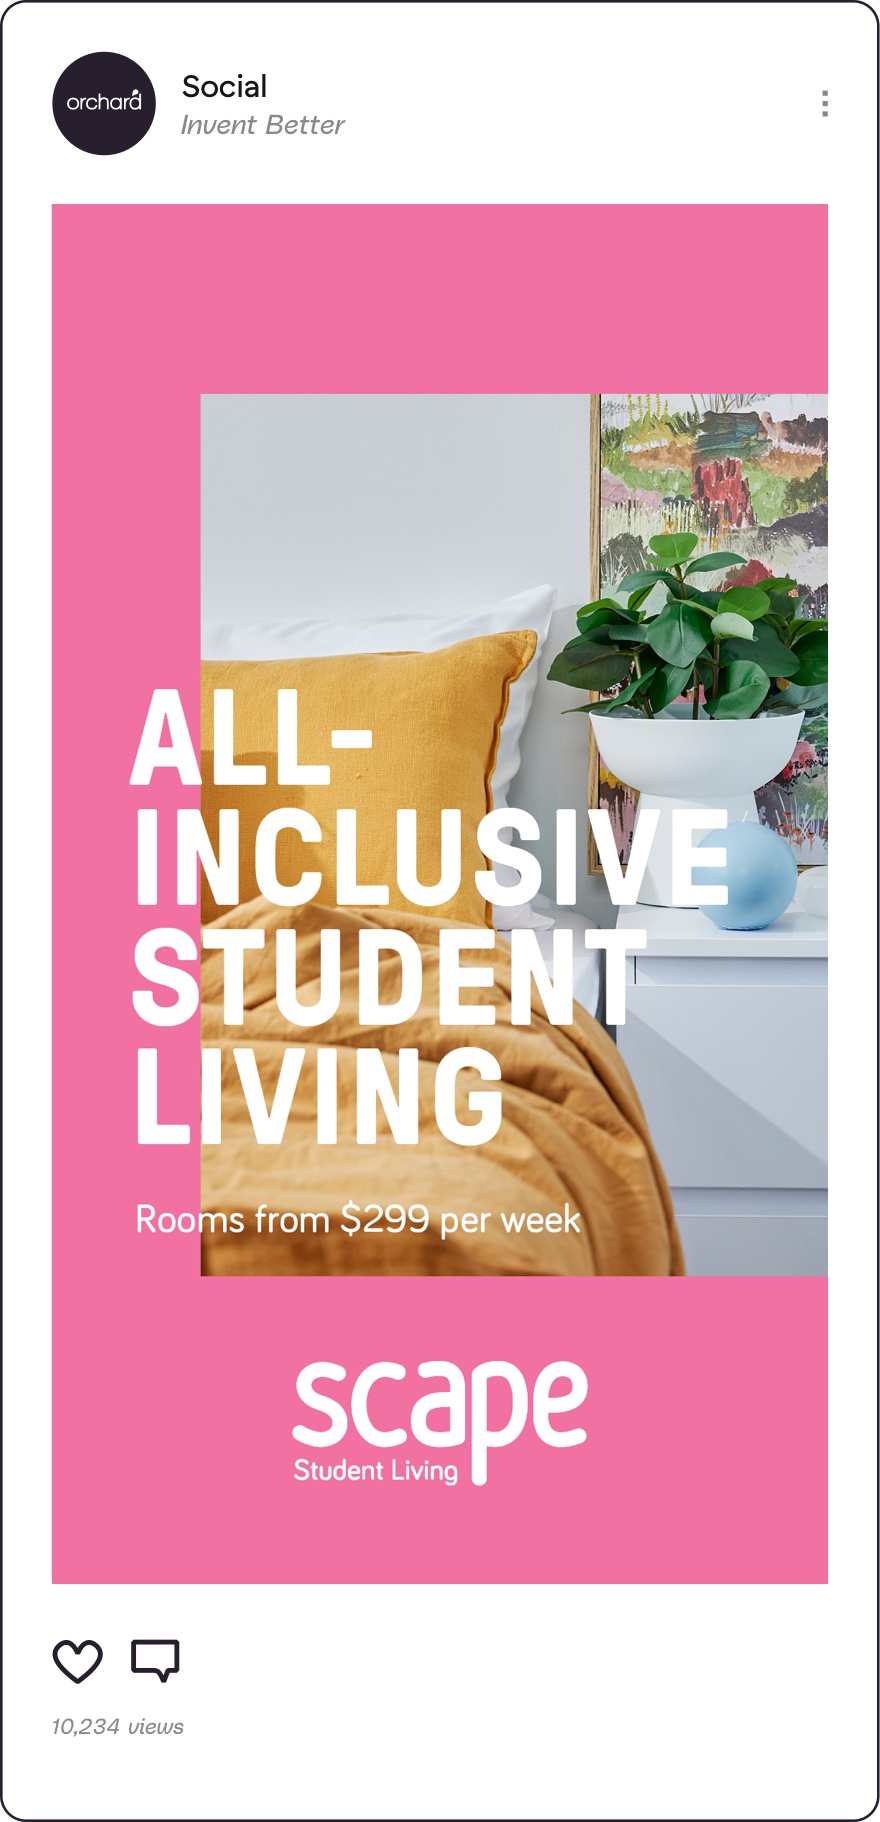 Mobile ad for all-inclusive student living accommodations